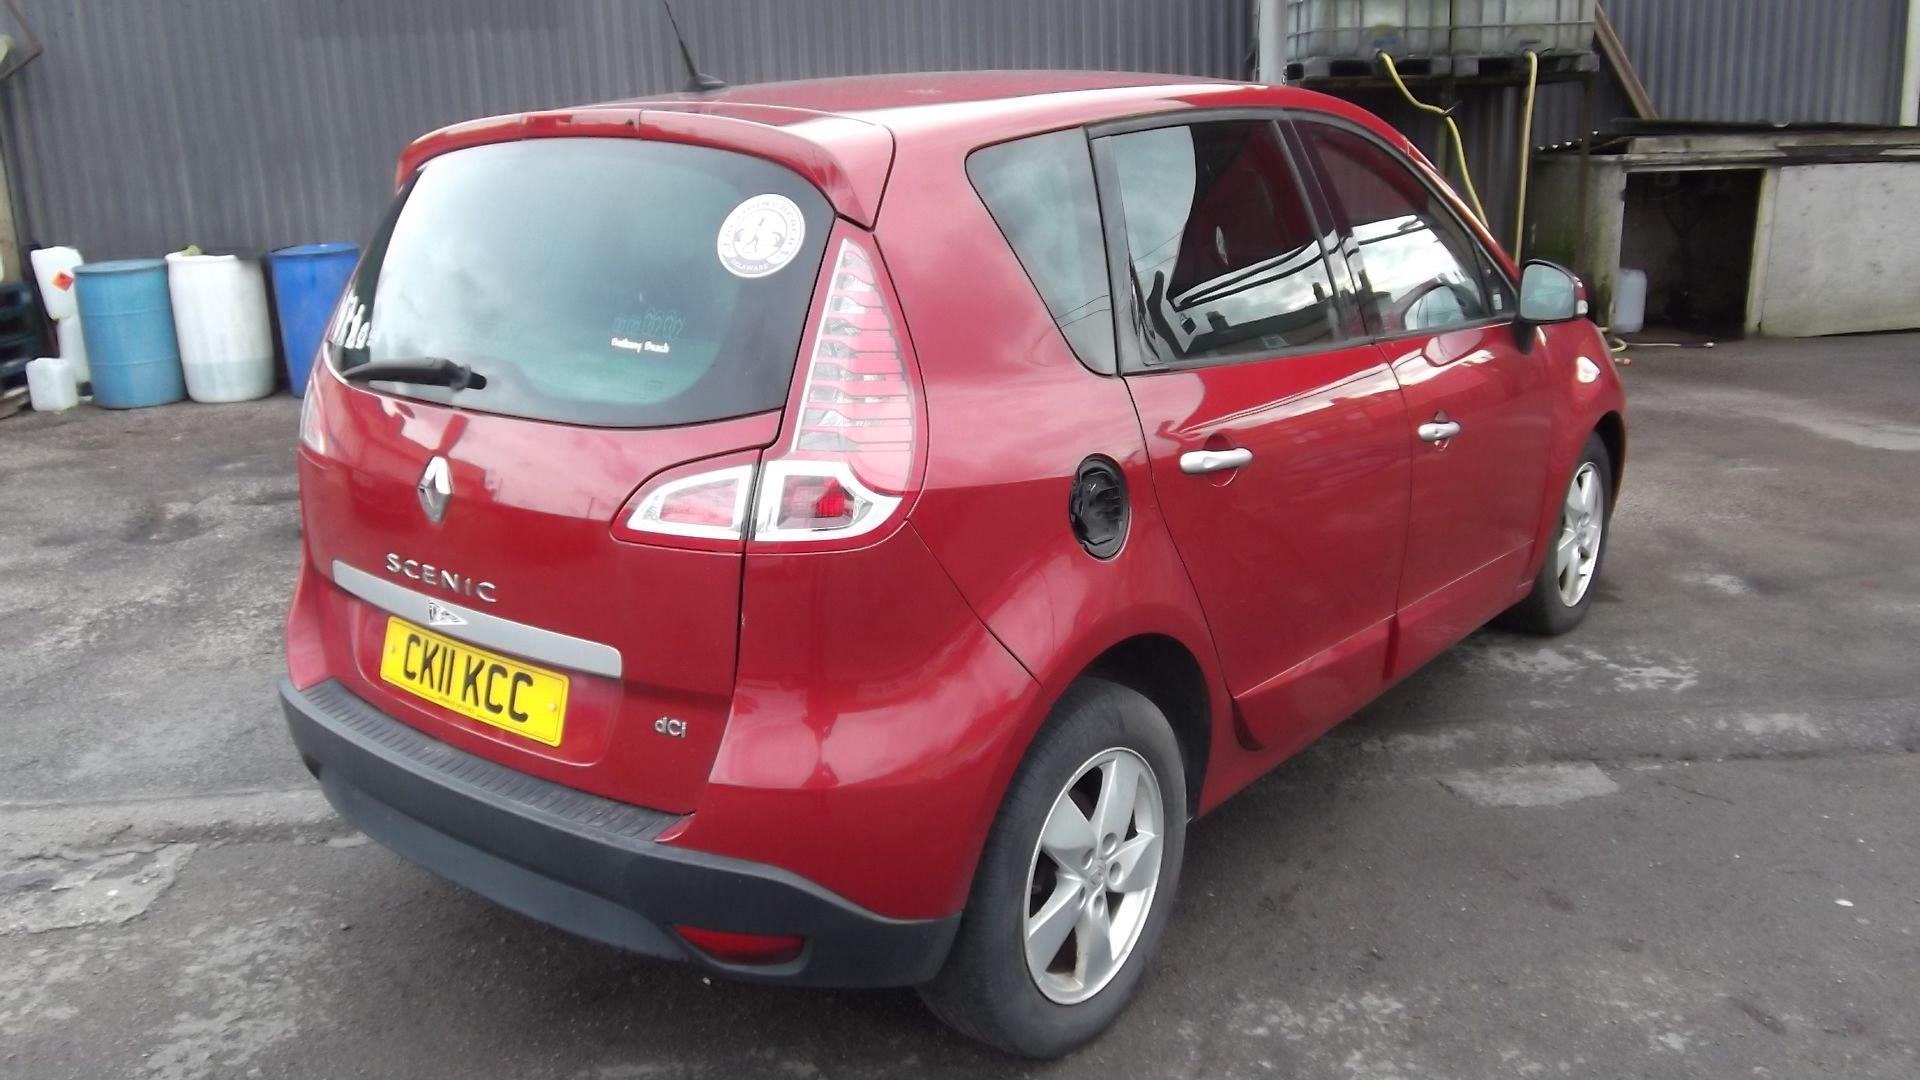 2011 Renault Scenic 1.5 DCI Dynamique Tom Tom 5 Door MPV - Image 8 of 17